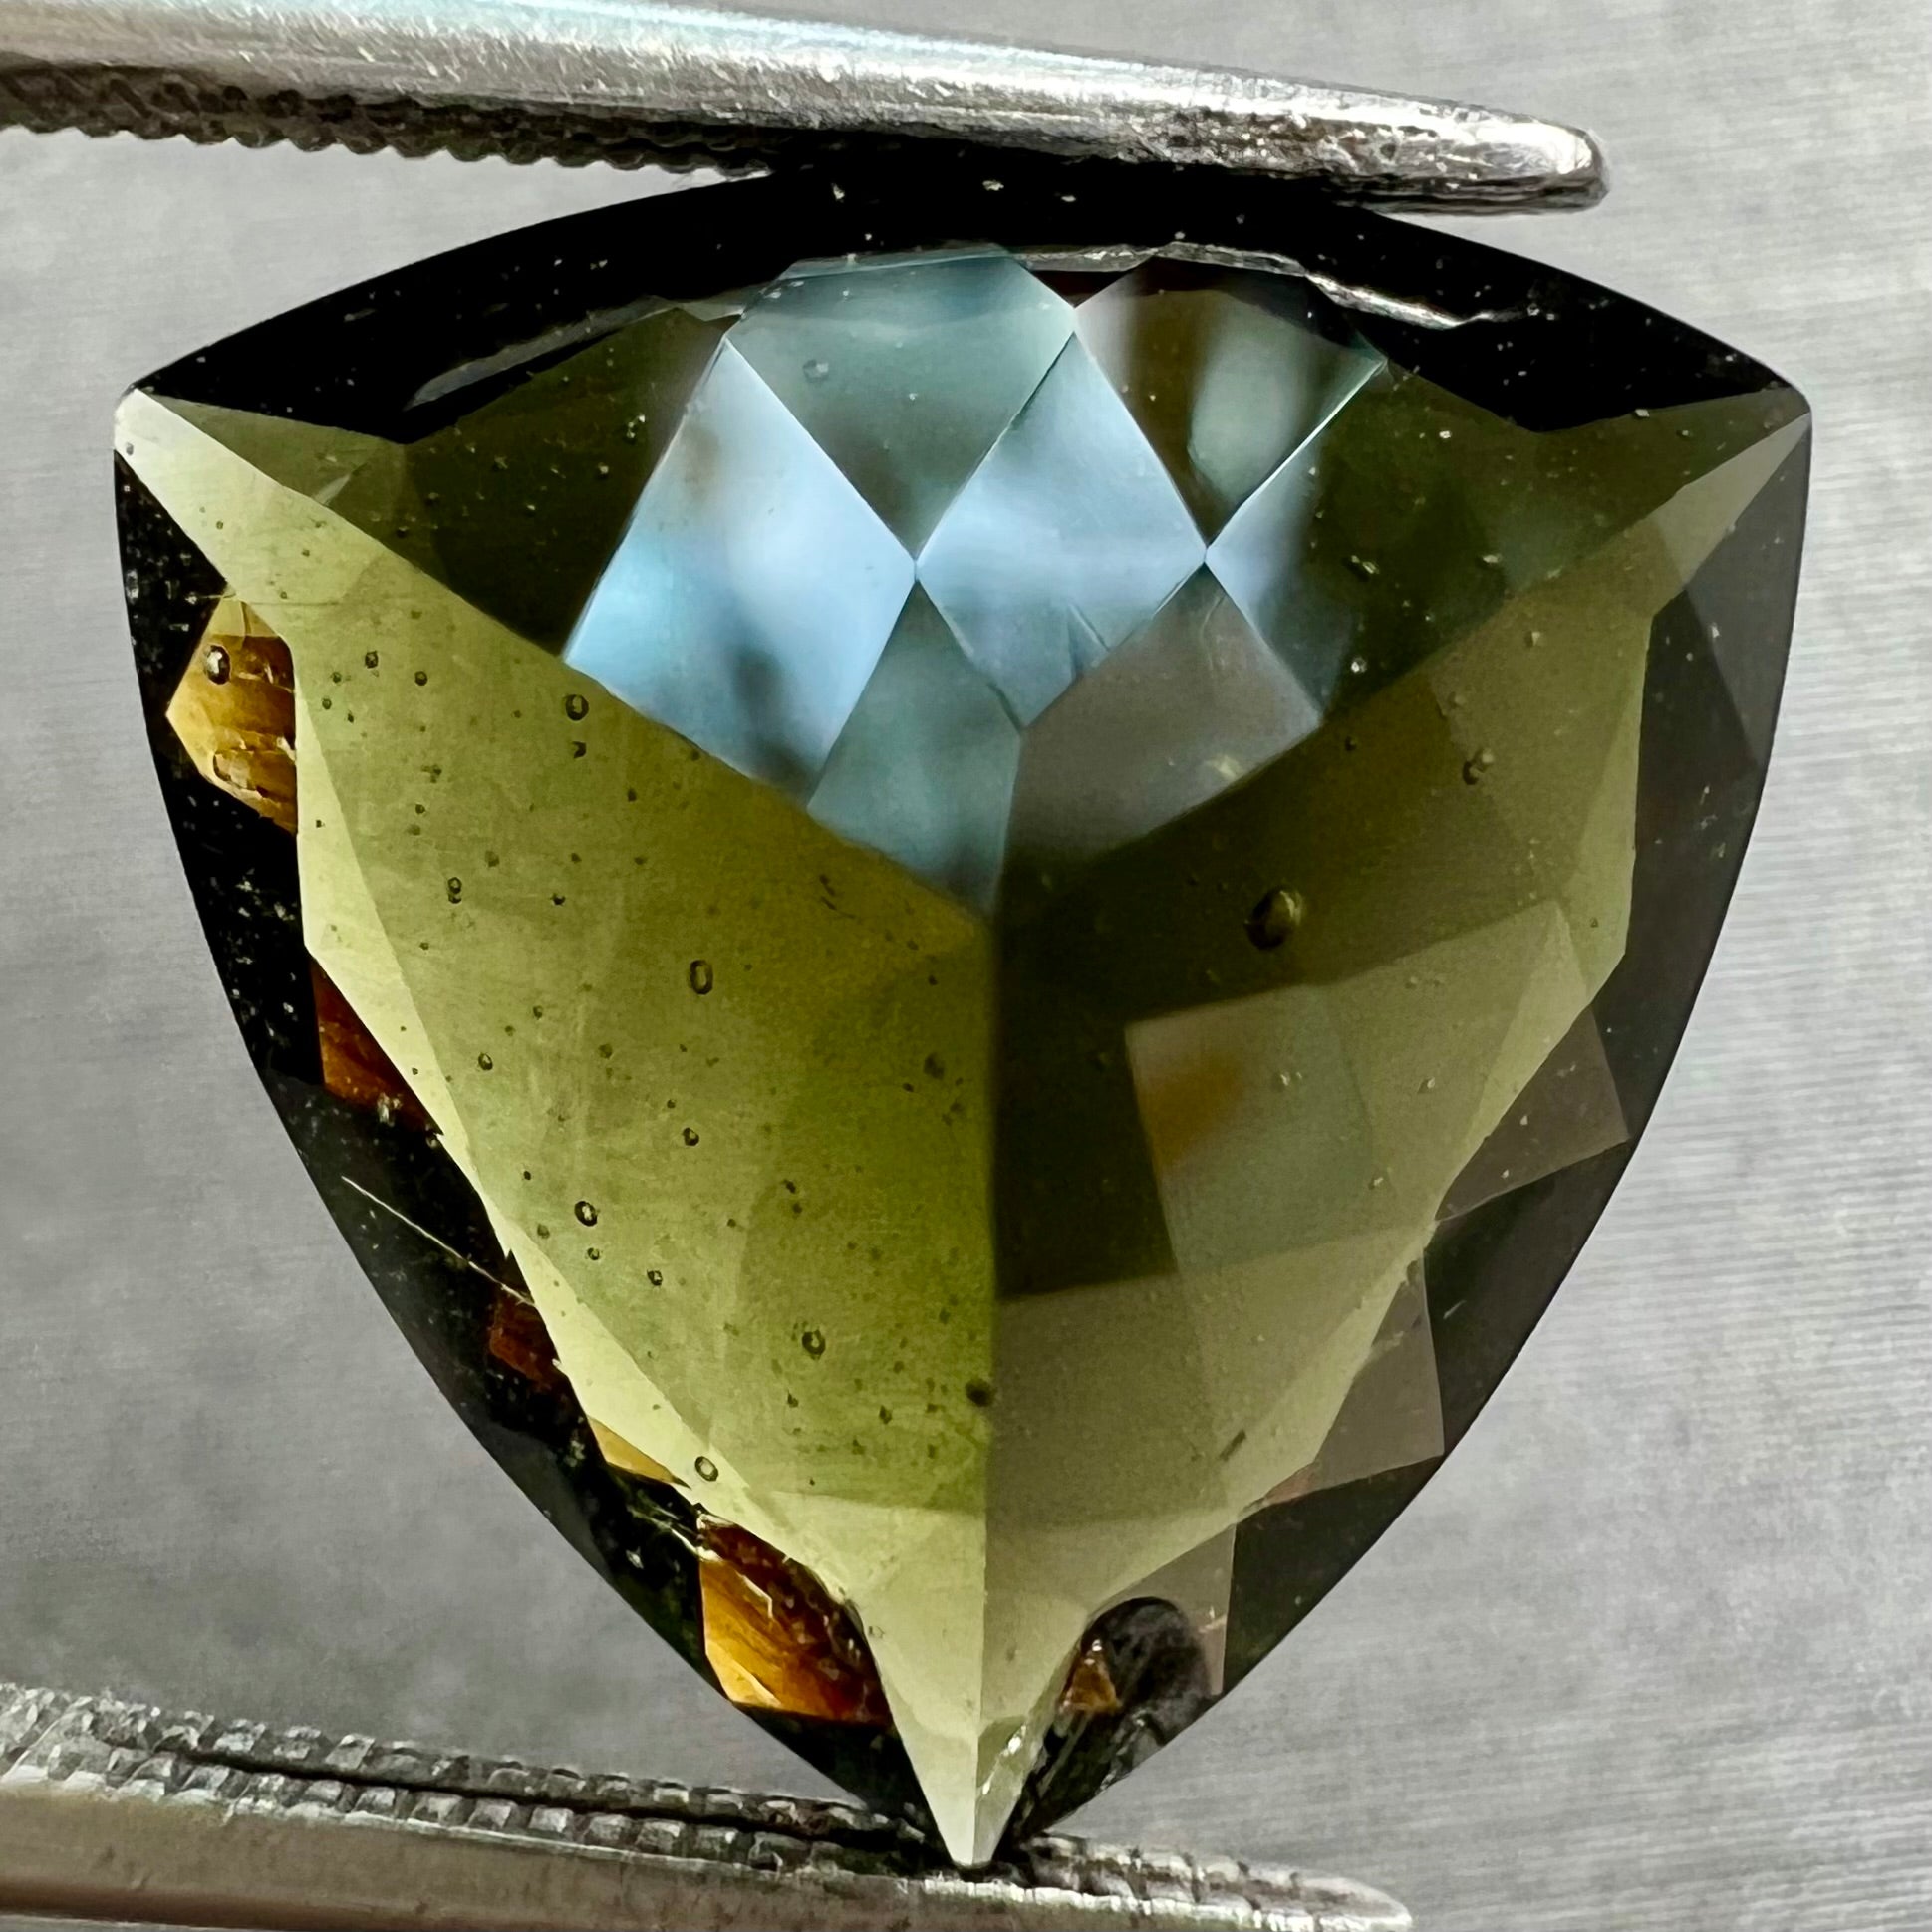 A faceted trillion cut moldavite gemstone that weighs 3.98 carats.  The stone is a dark green color.